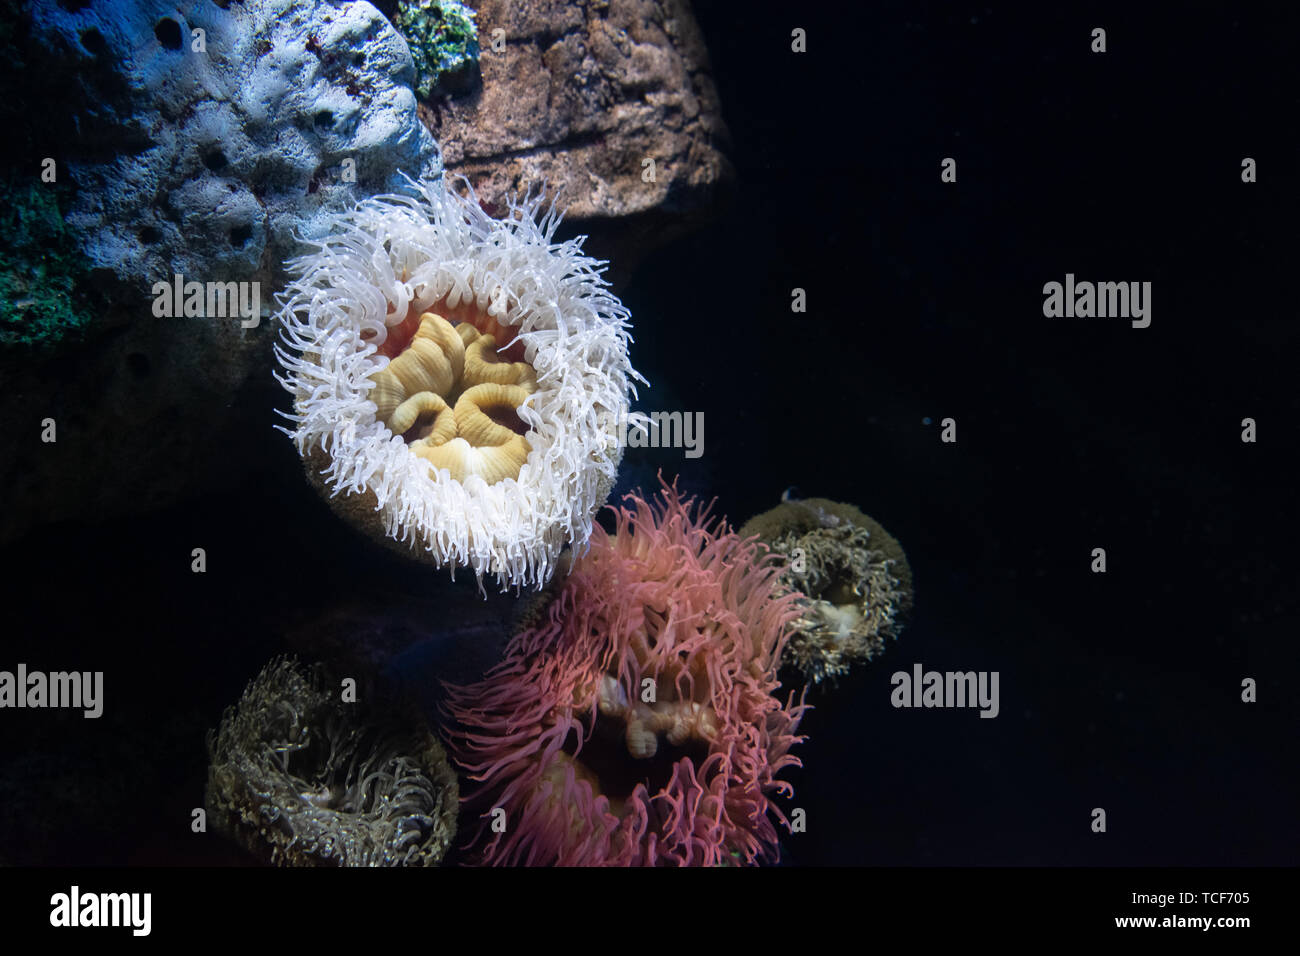 Various colorful corals with tentacles on black background. Stock Photo